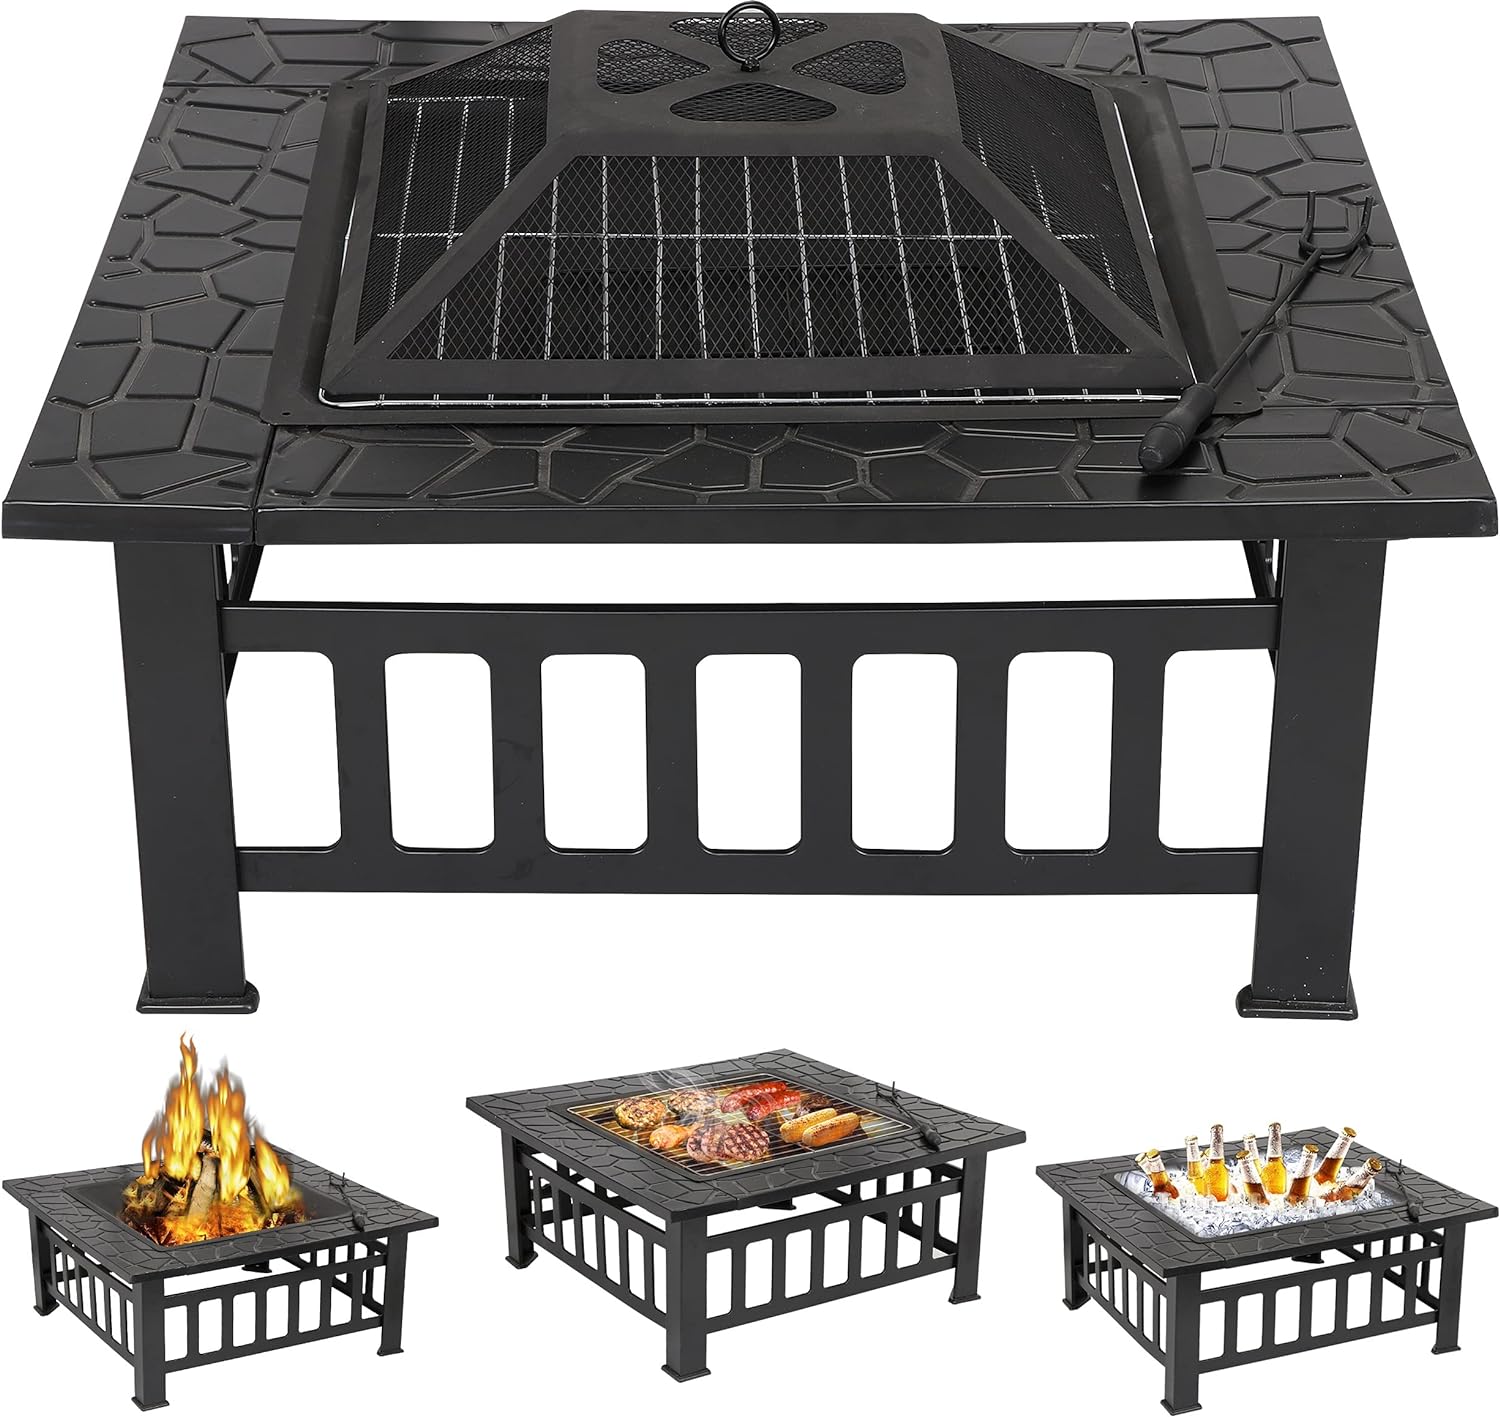 ZENY 32 Outdoor Fire Pit Square Table Metal Firepit Table Backyard Patio Garden Stove Wood Burning Fireplace w/ Waterproof Cover, Spark Screen and Poker